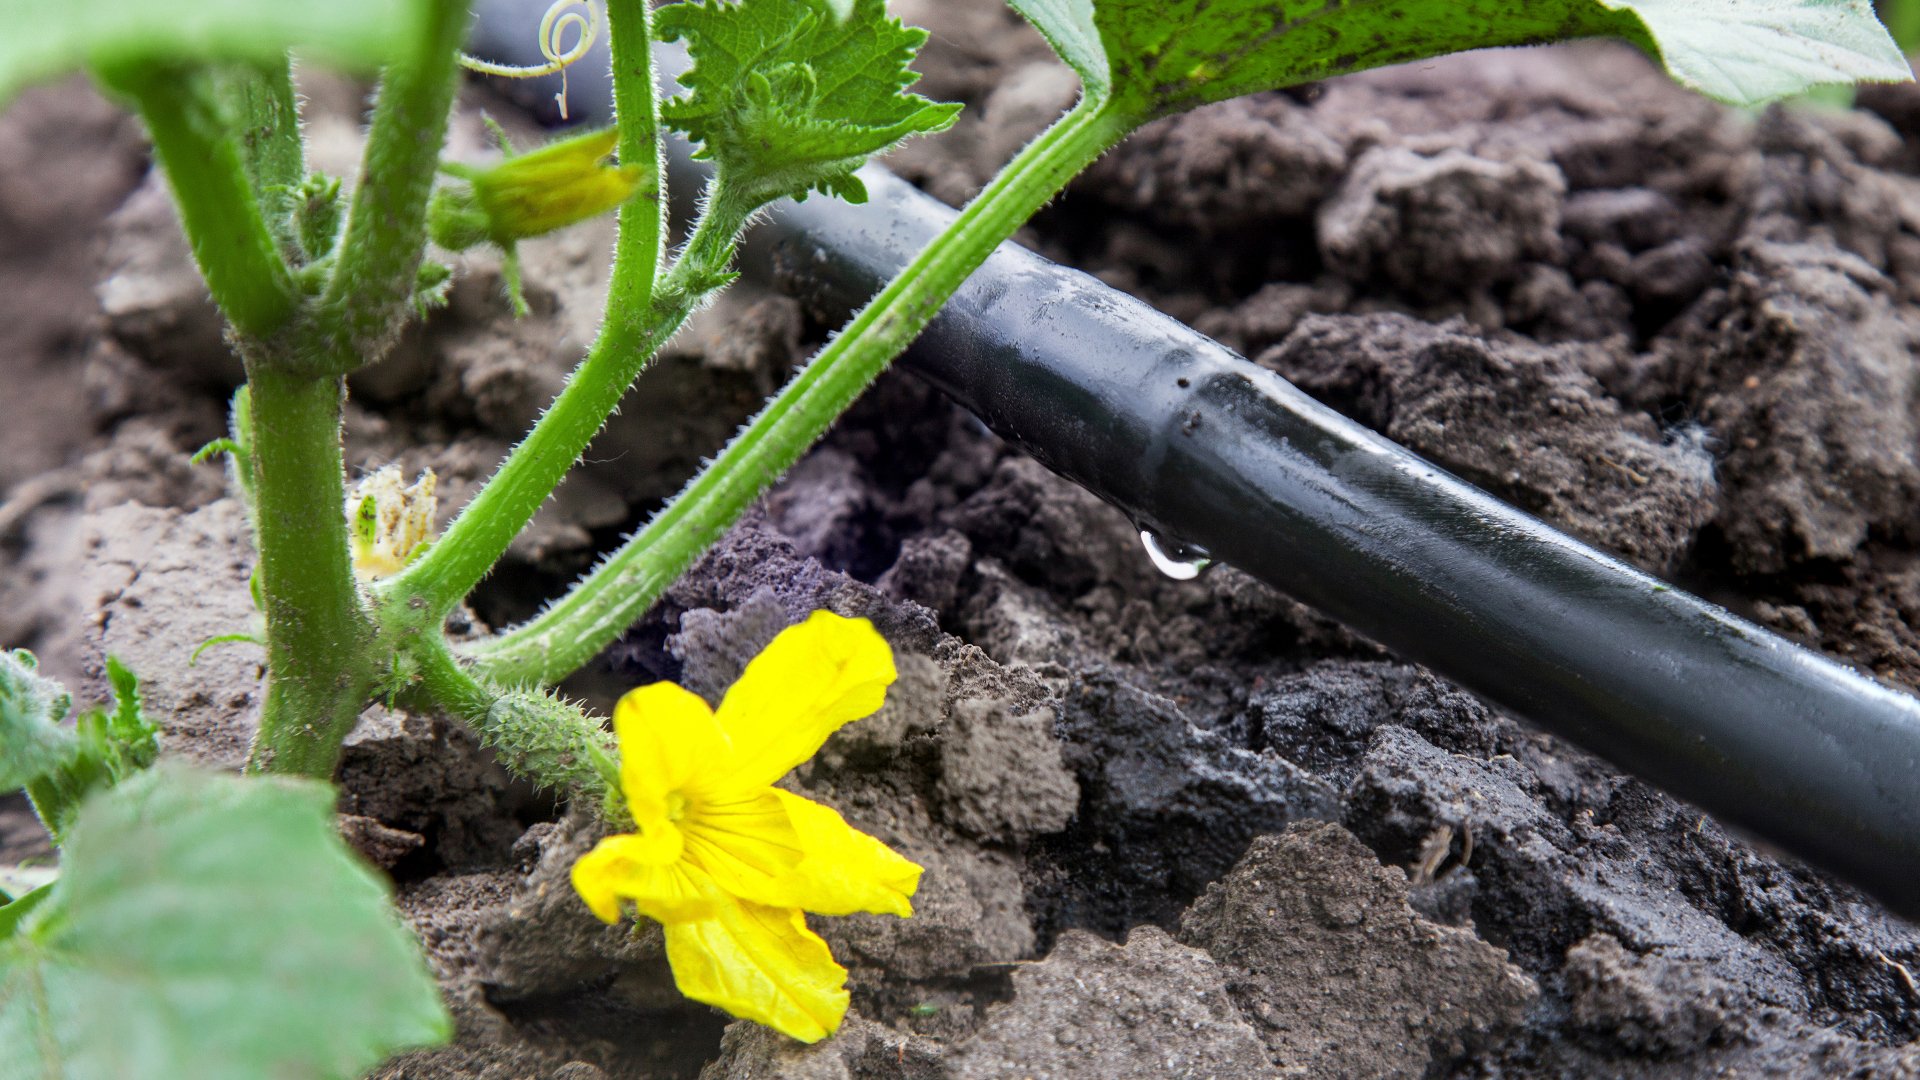 Should You Install a Drip Irrigation or Sprinkler System for Your Garden?